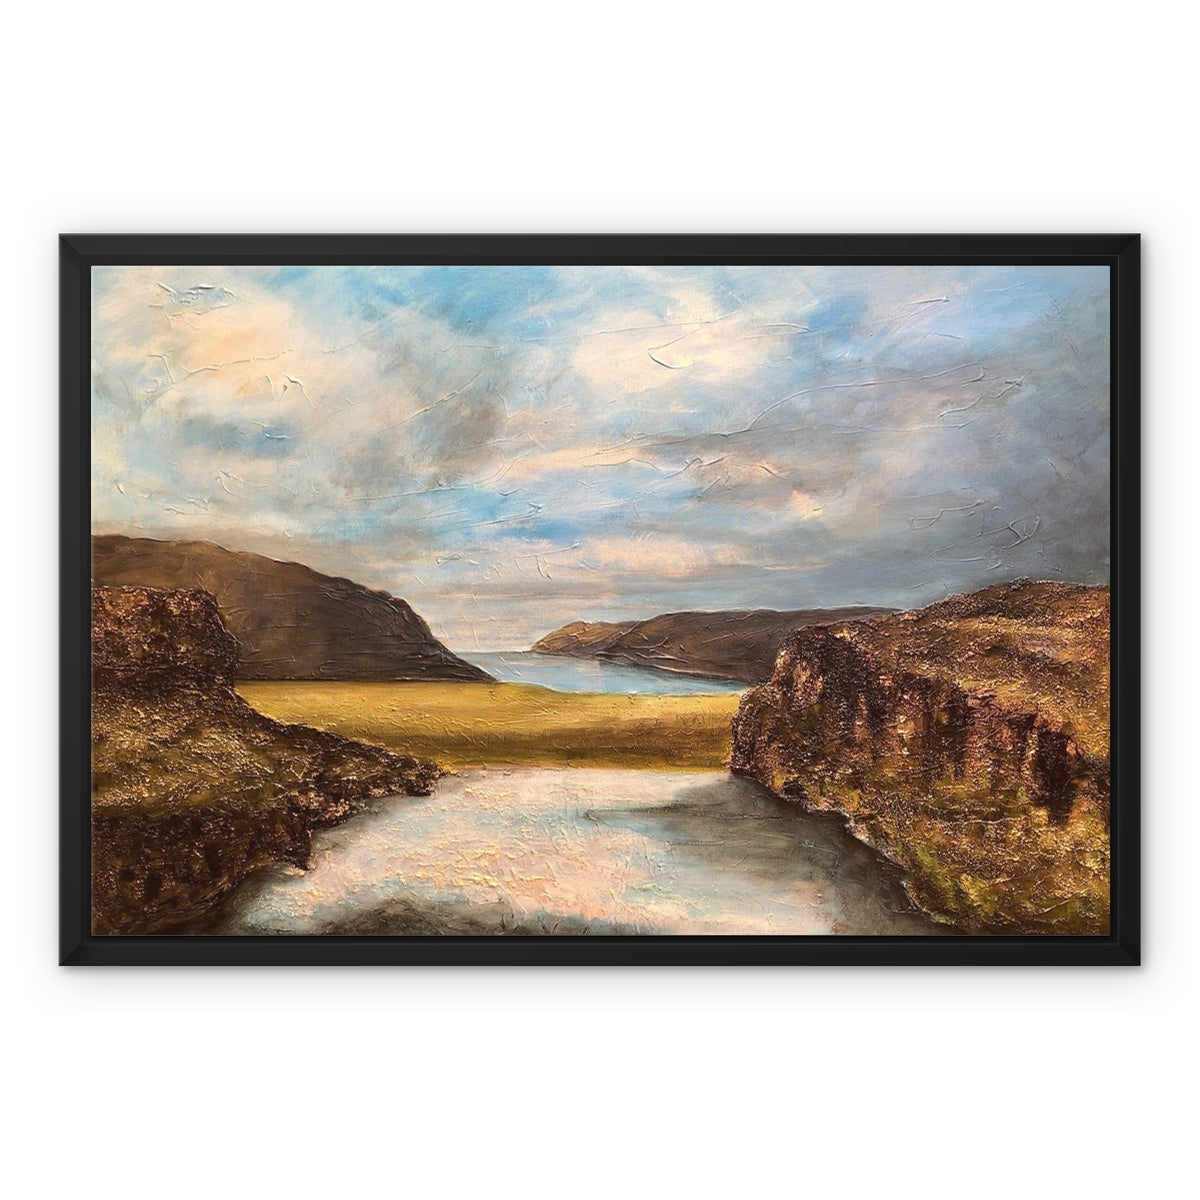 Westfjords Iceland Painting | Framed Canvas From Scotland-Floating Framed Canvas Prints-World Art Gallery-24"x18"-Black Frame-Paintings, Prints, Homeware, Art Gifts From Scotland By Scottish Artist Kevin Hunter